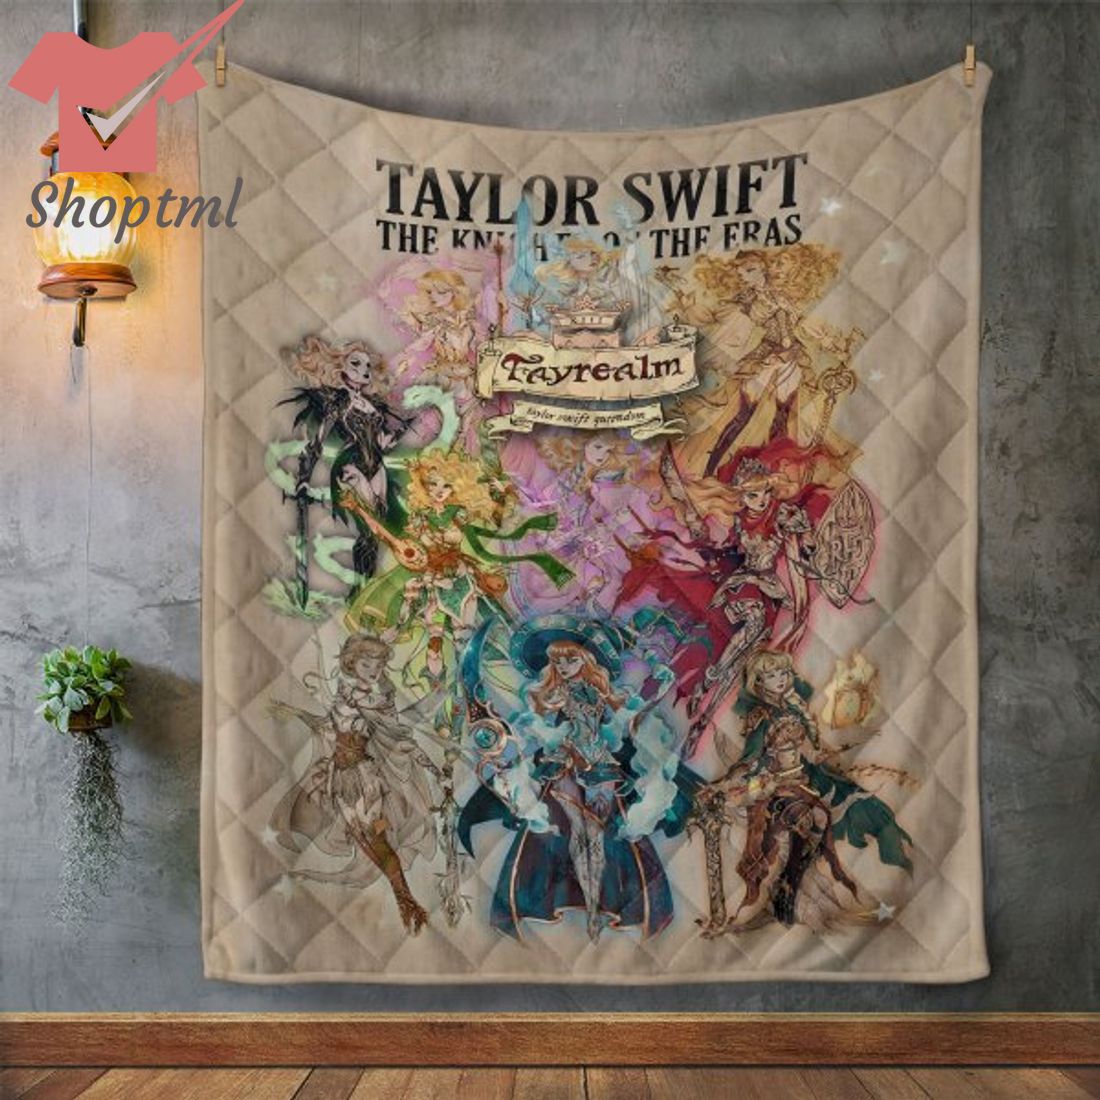 Taylor Swift Tayrealm Quilt Blanket